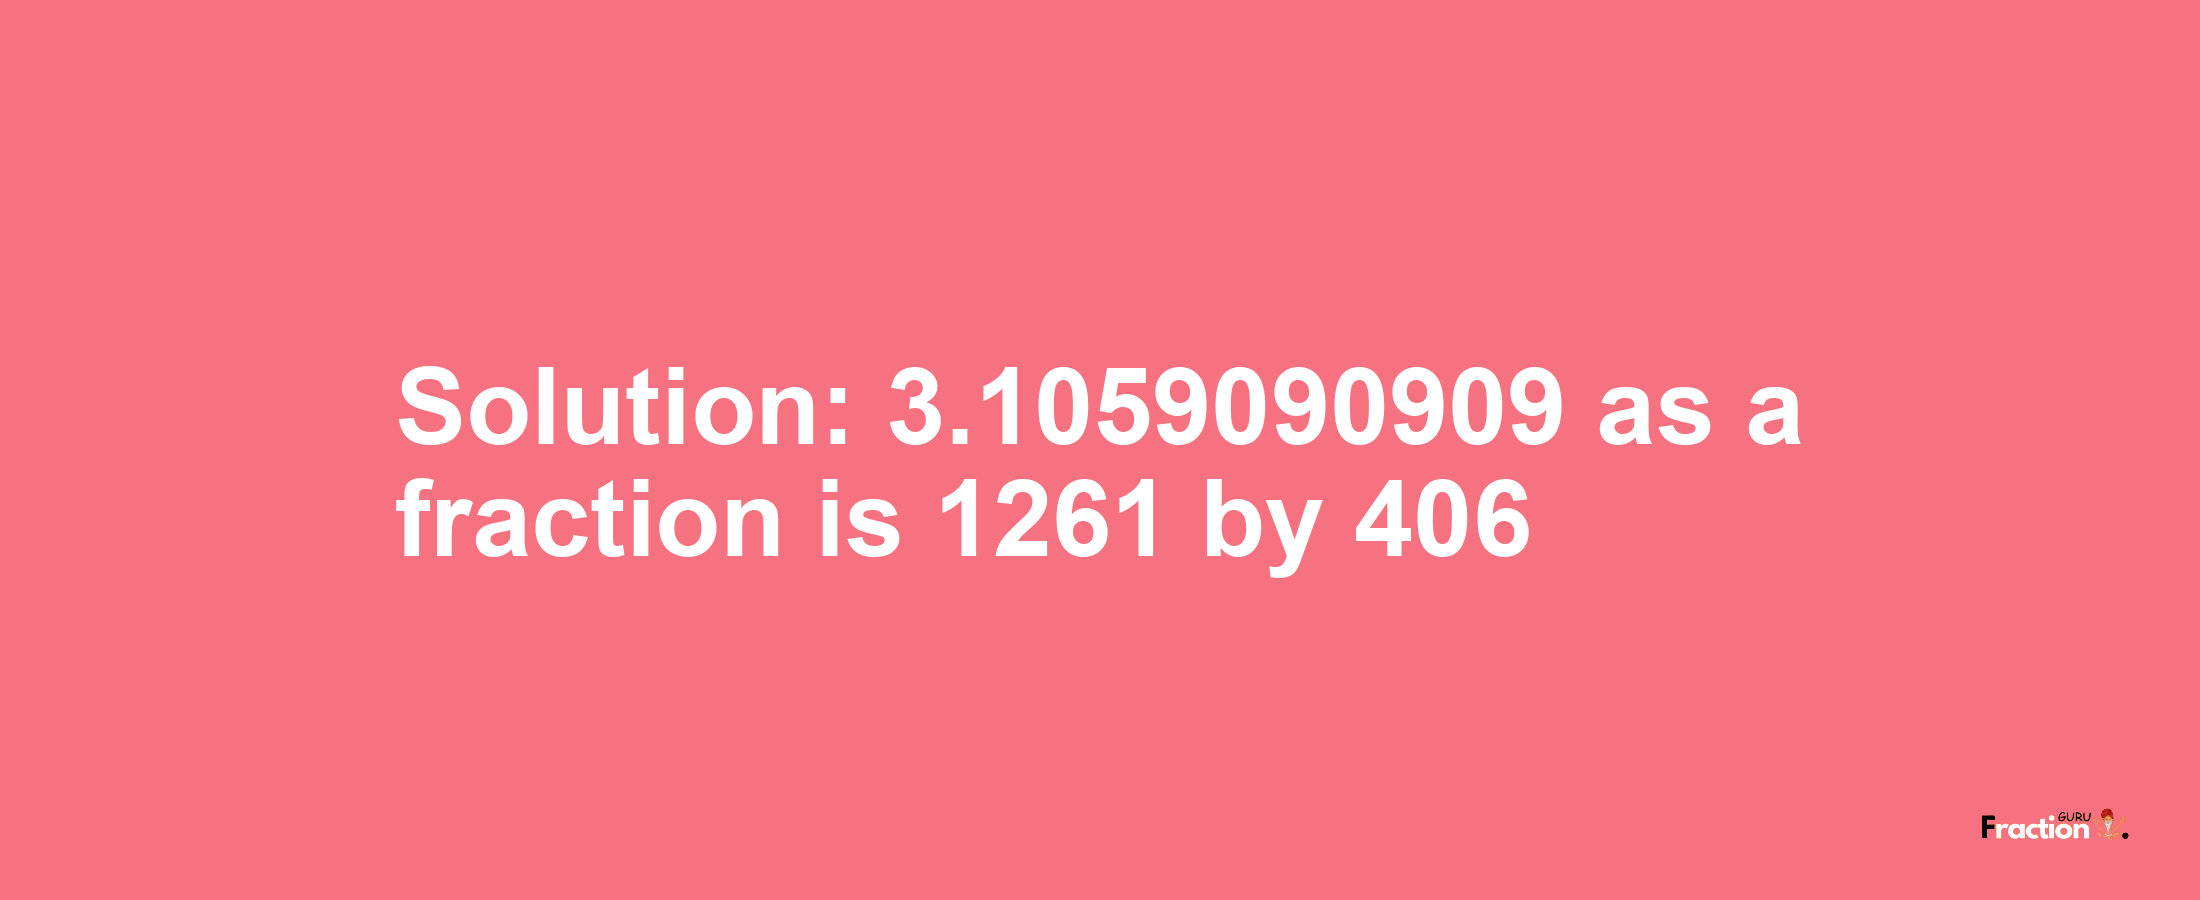 Solution:3.1059090909 as a fraction is 1261/406